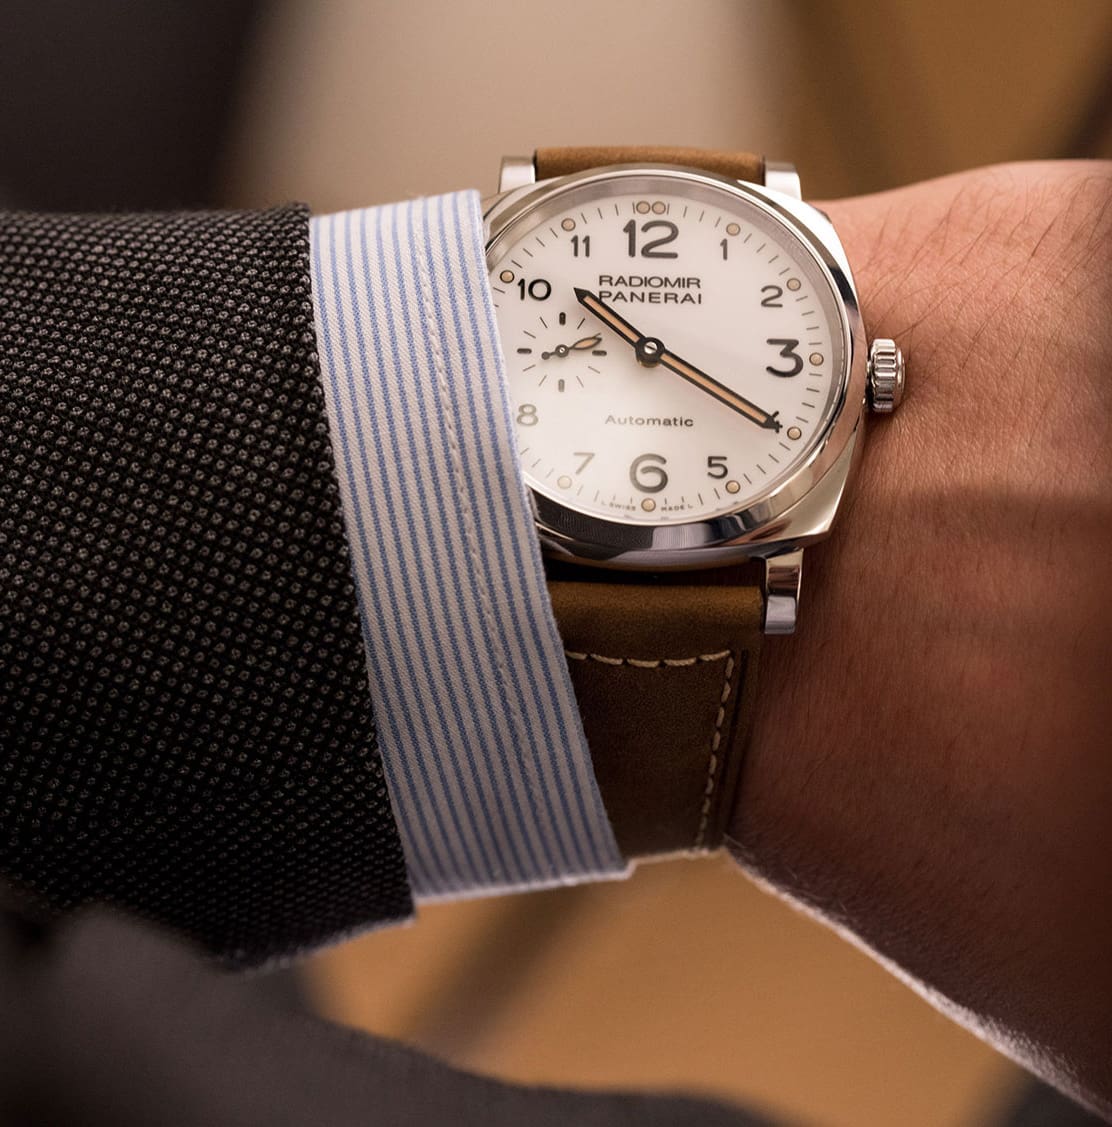 GONE IN 60 SECONDS: From tough guy to dapper gent – the Panerai PAM 655 Radiomir 1940 3 Days Automatic Acciaio video review